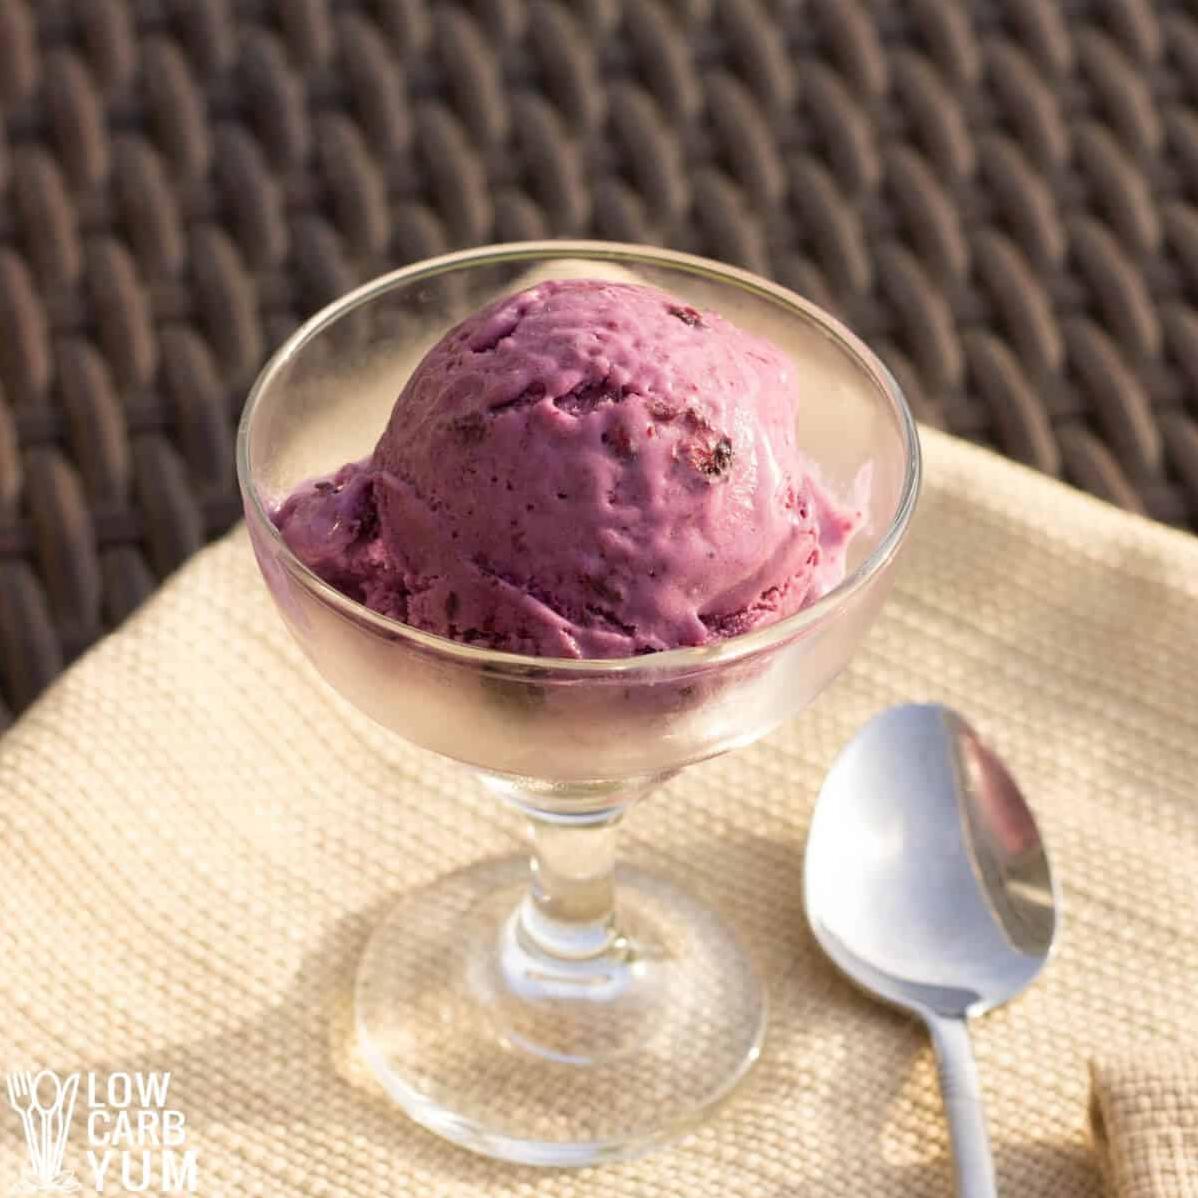  This blueberry ice cream is so good, it's berry-licious!